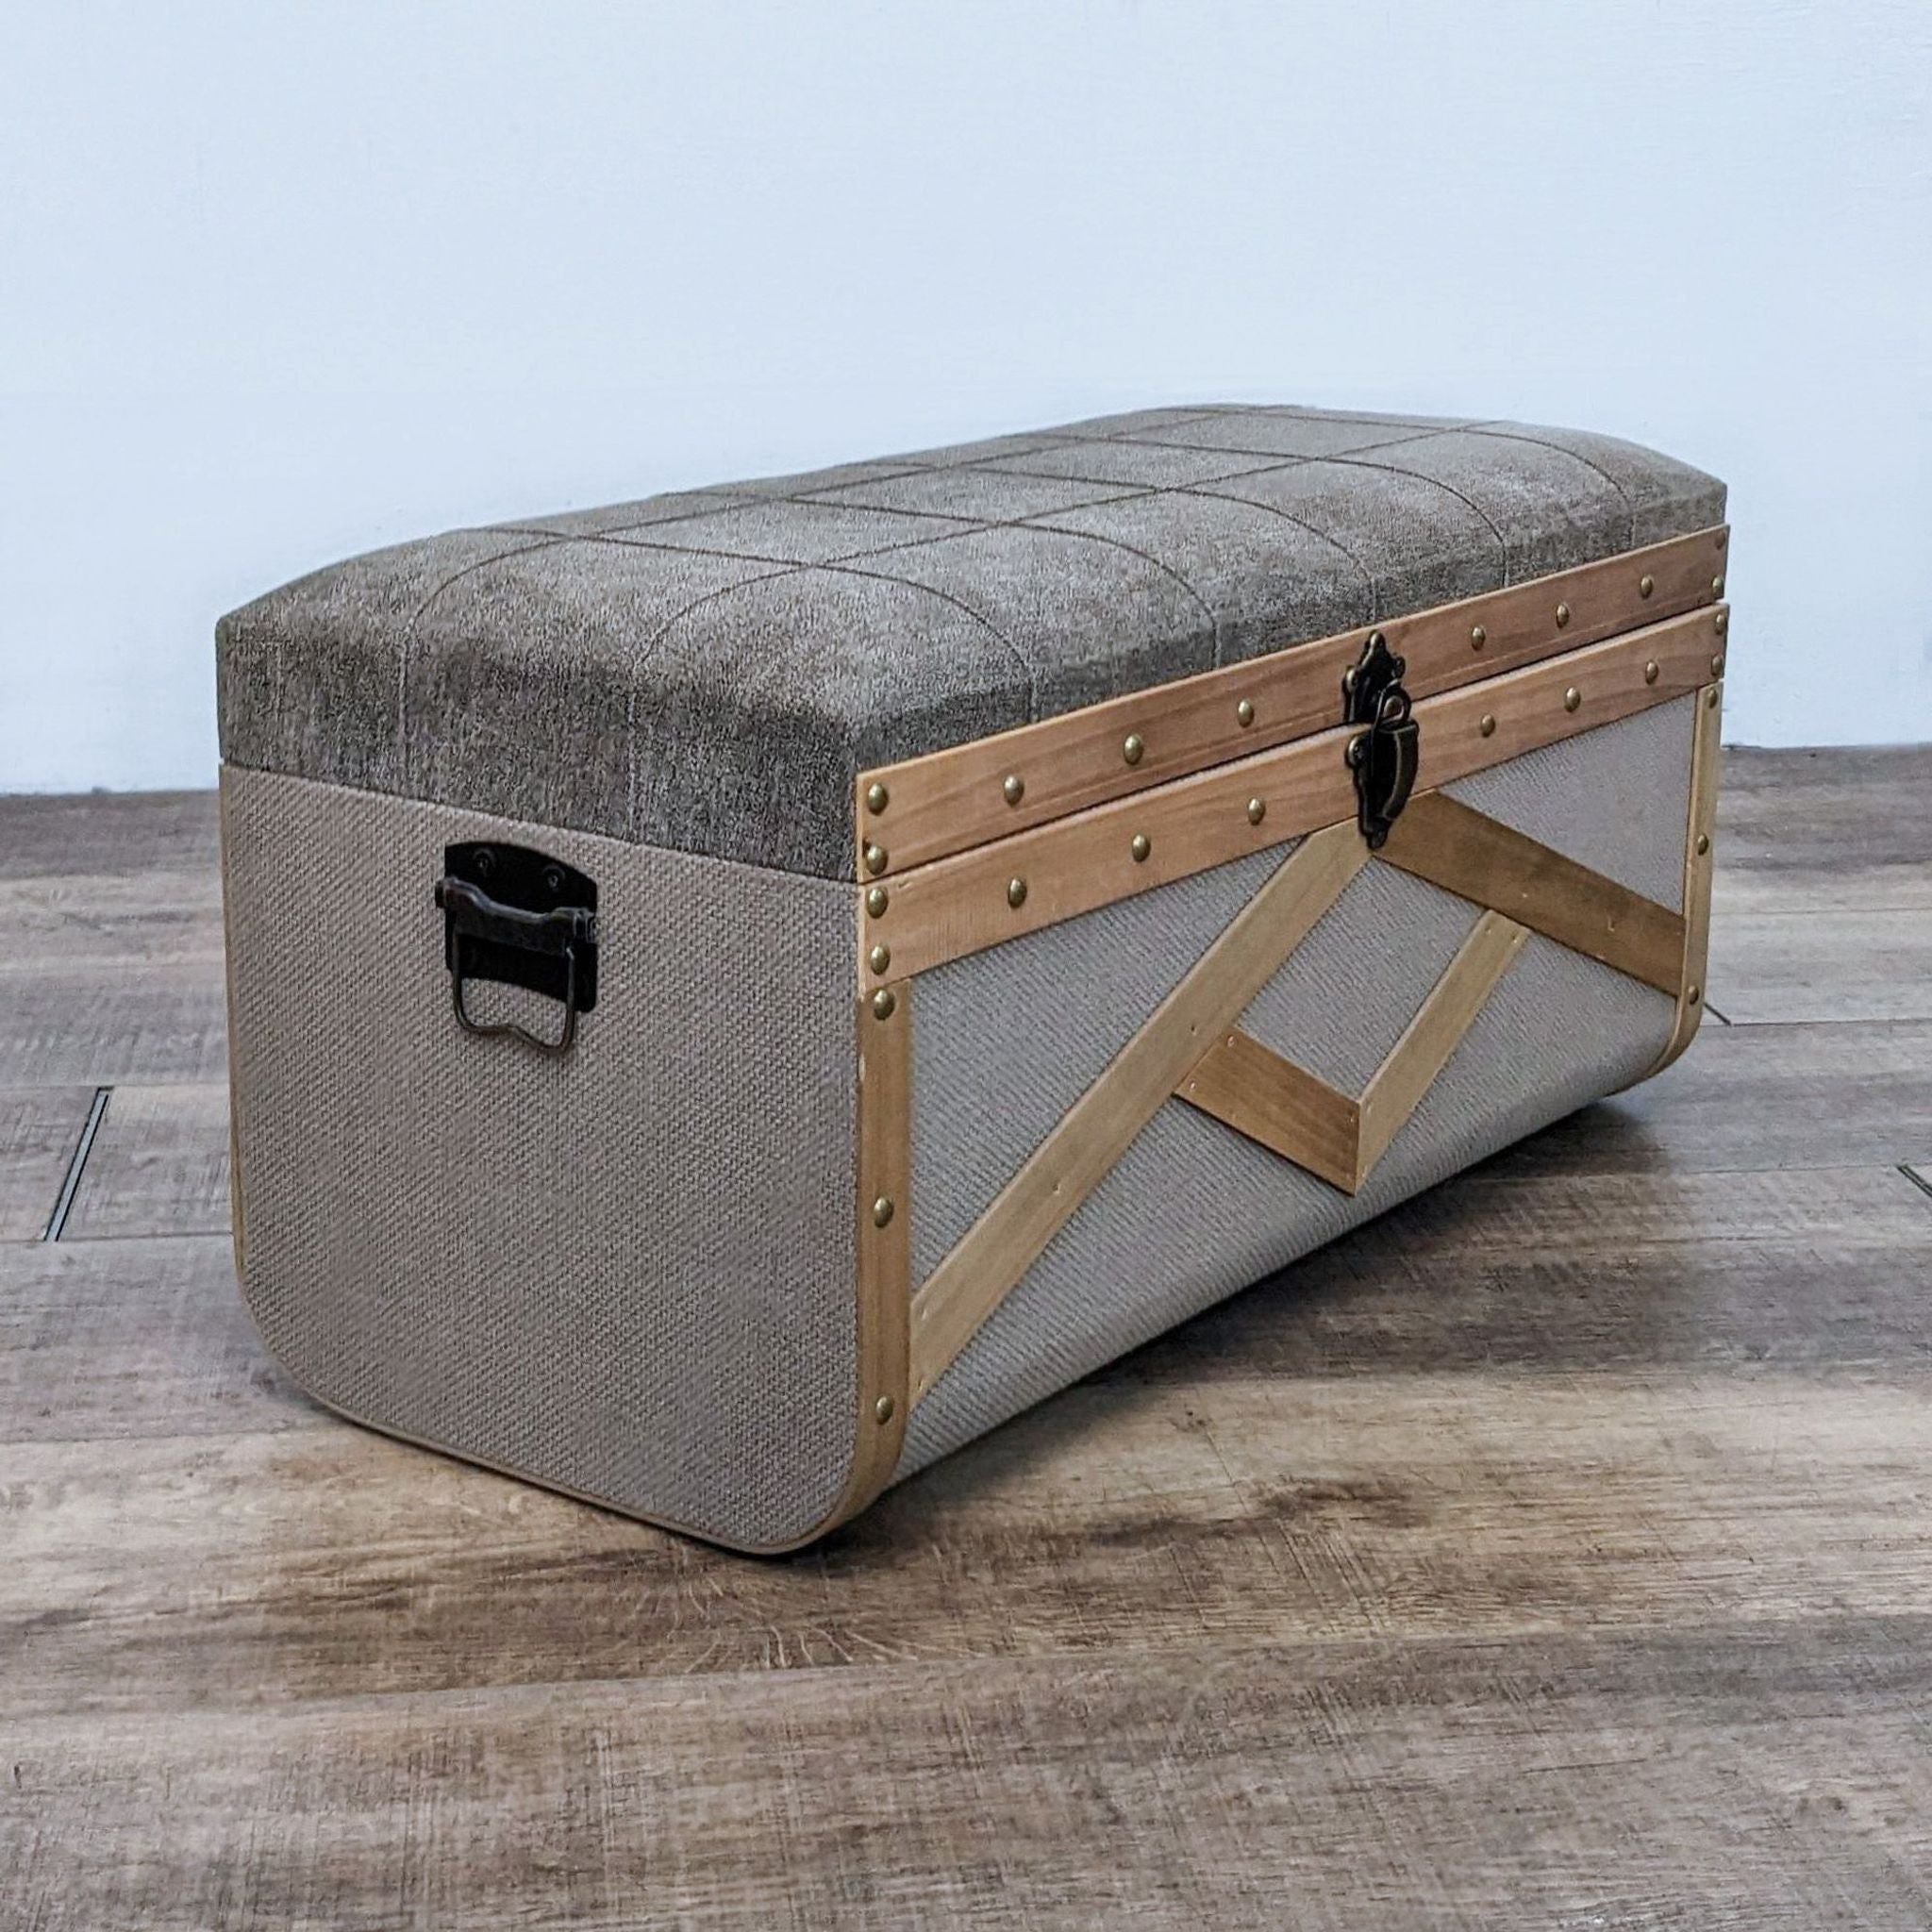 Reperch fabric trunk with wood detailing, brass studs, and dark metal hardware, used as a stool or bench.